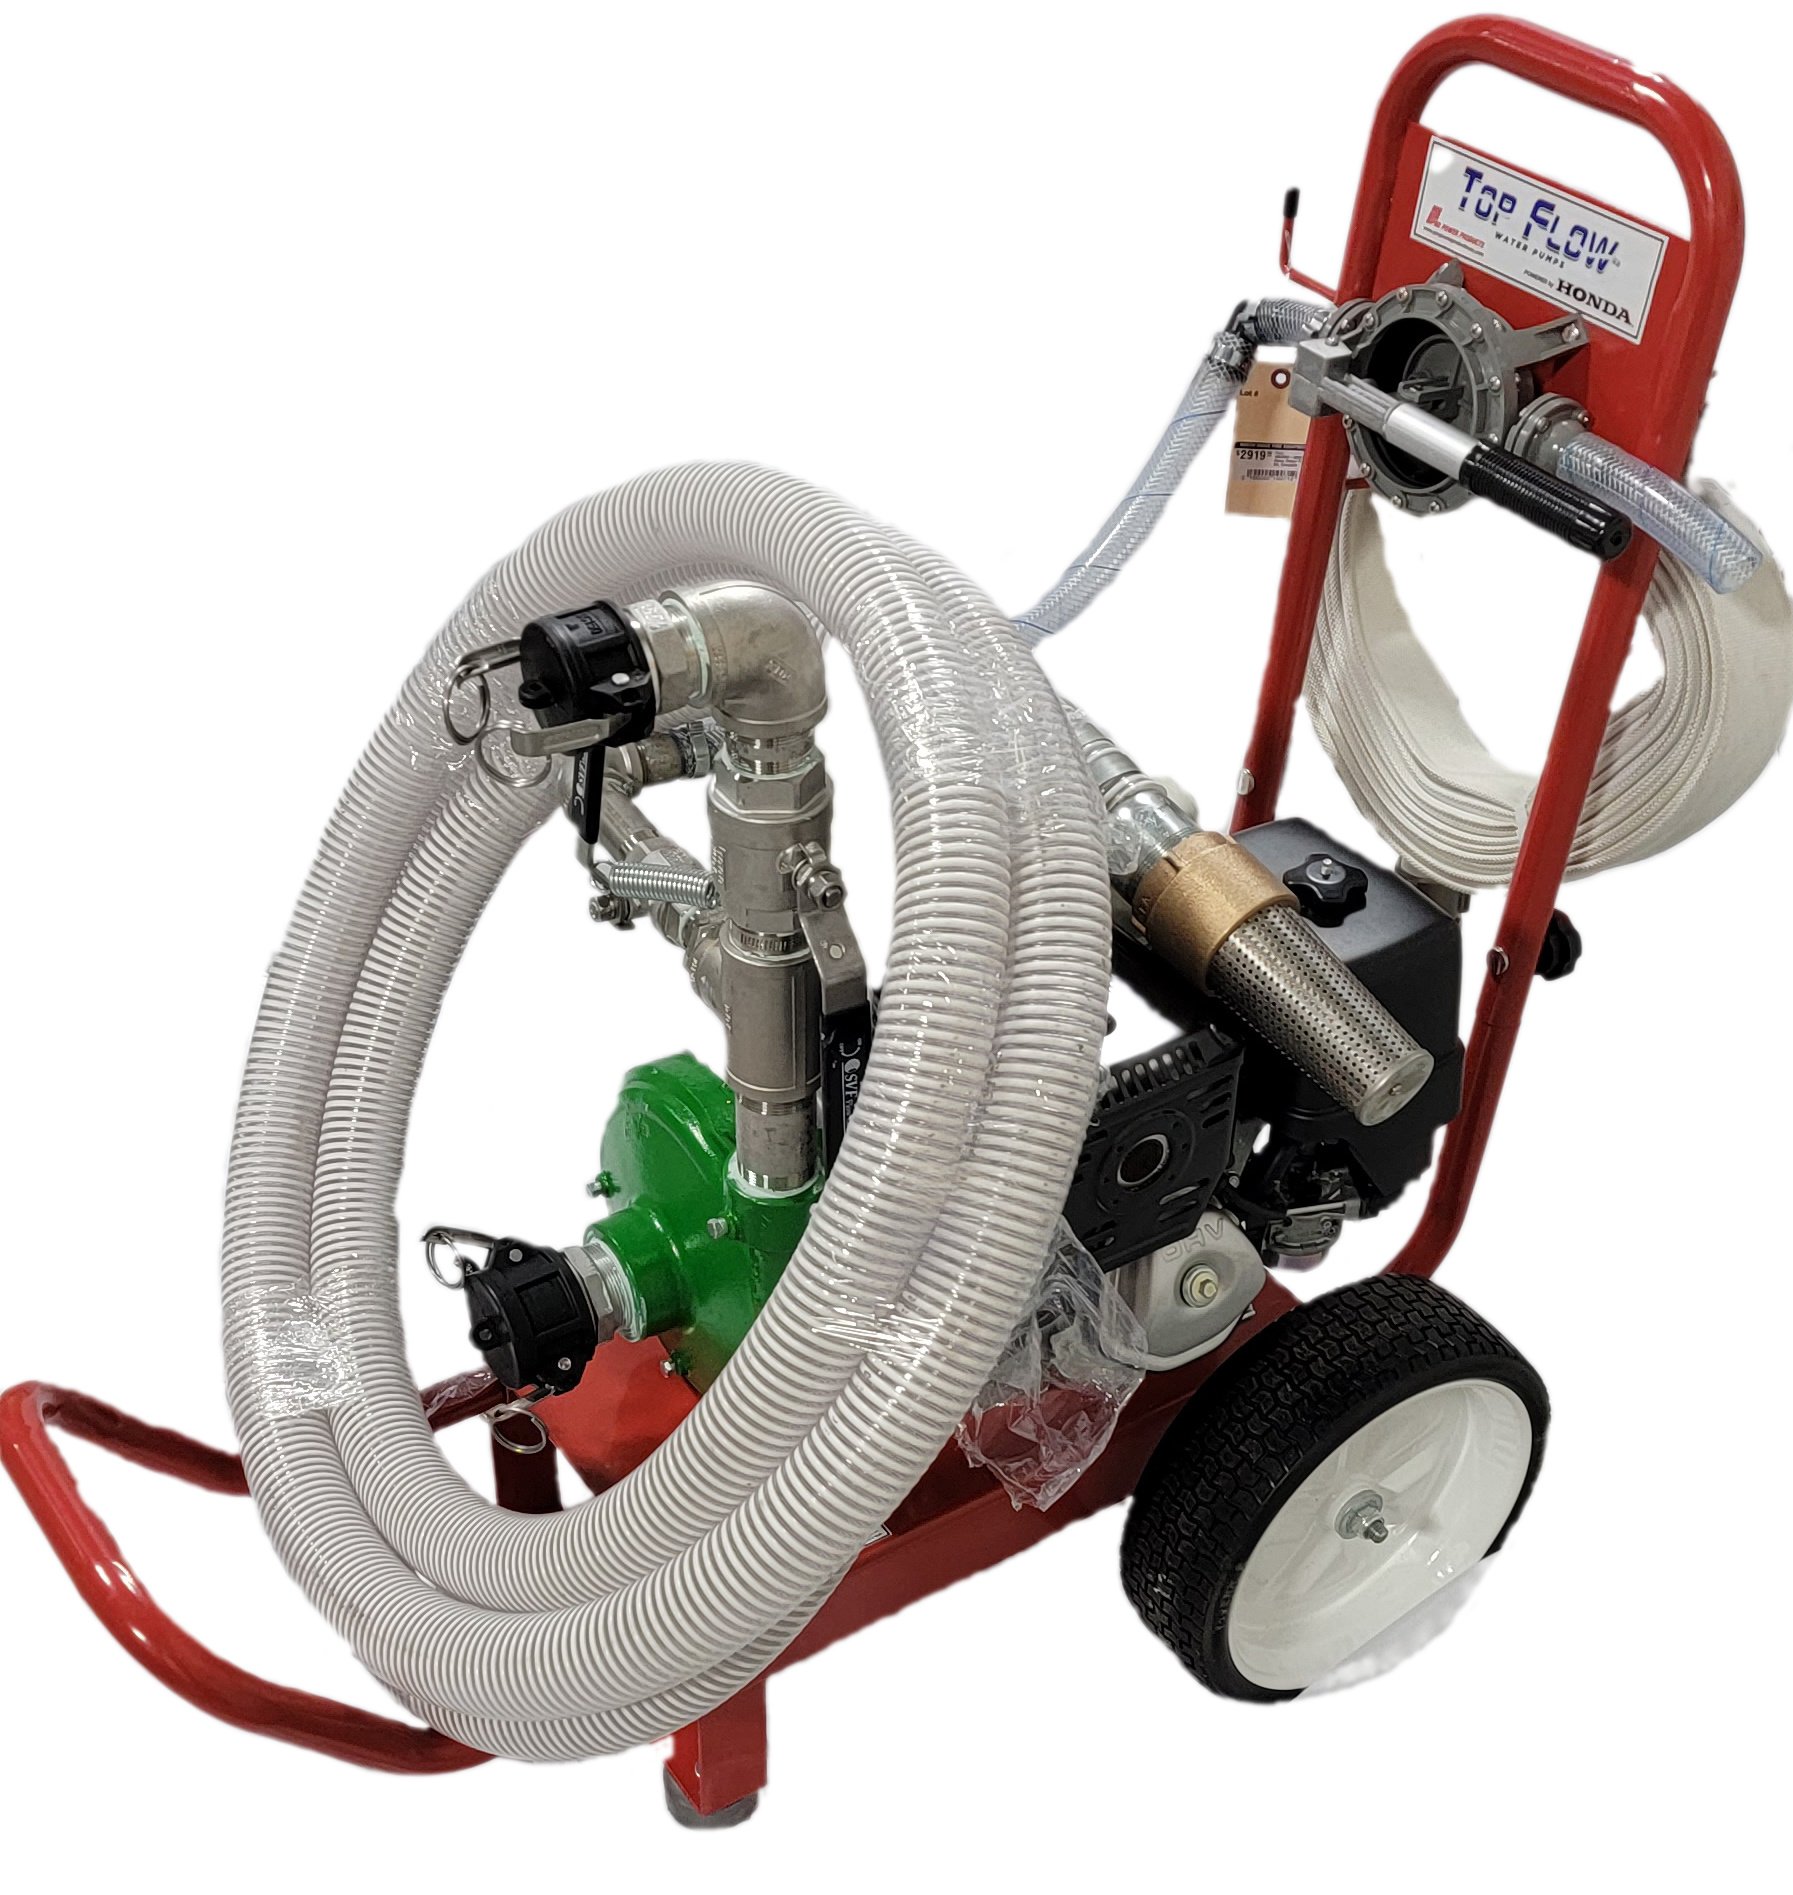 Pro Power Products Pro Power Products Homeowner Pump Kit, Complete Mounted on Cart